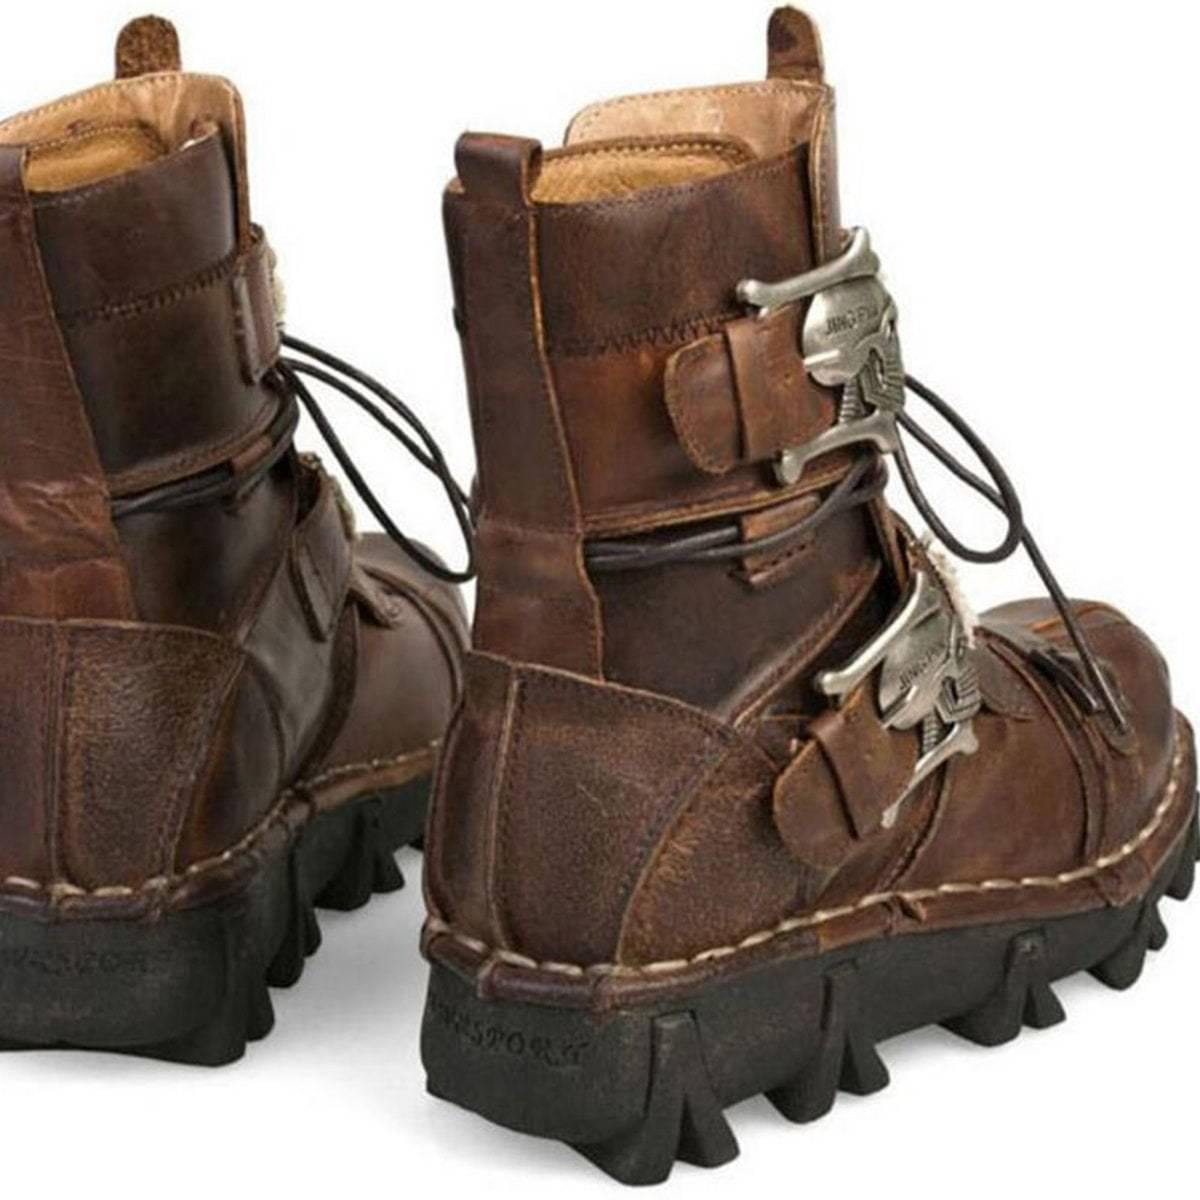 A pair of Handmade Leather Skull Boots with metal buckles.